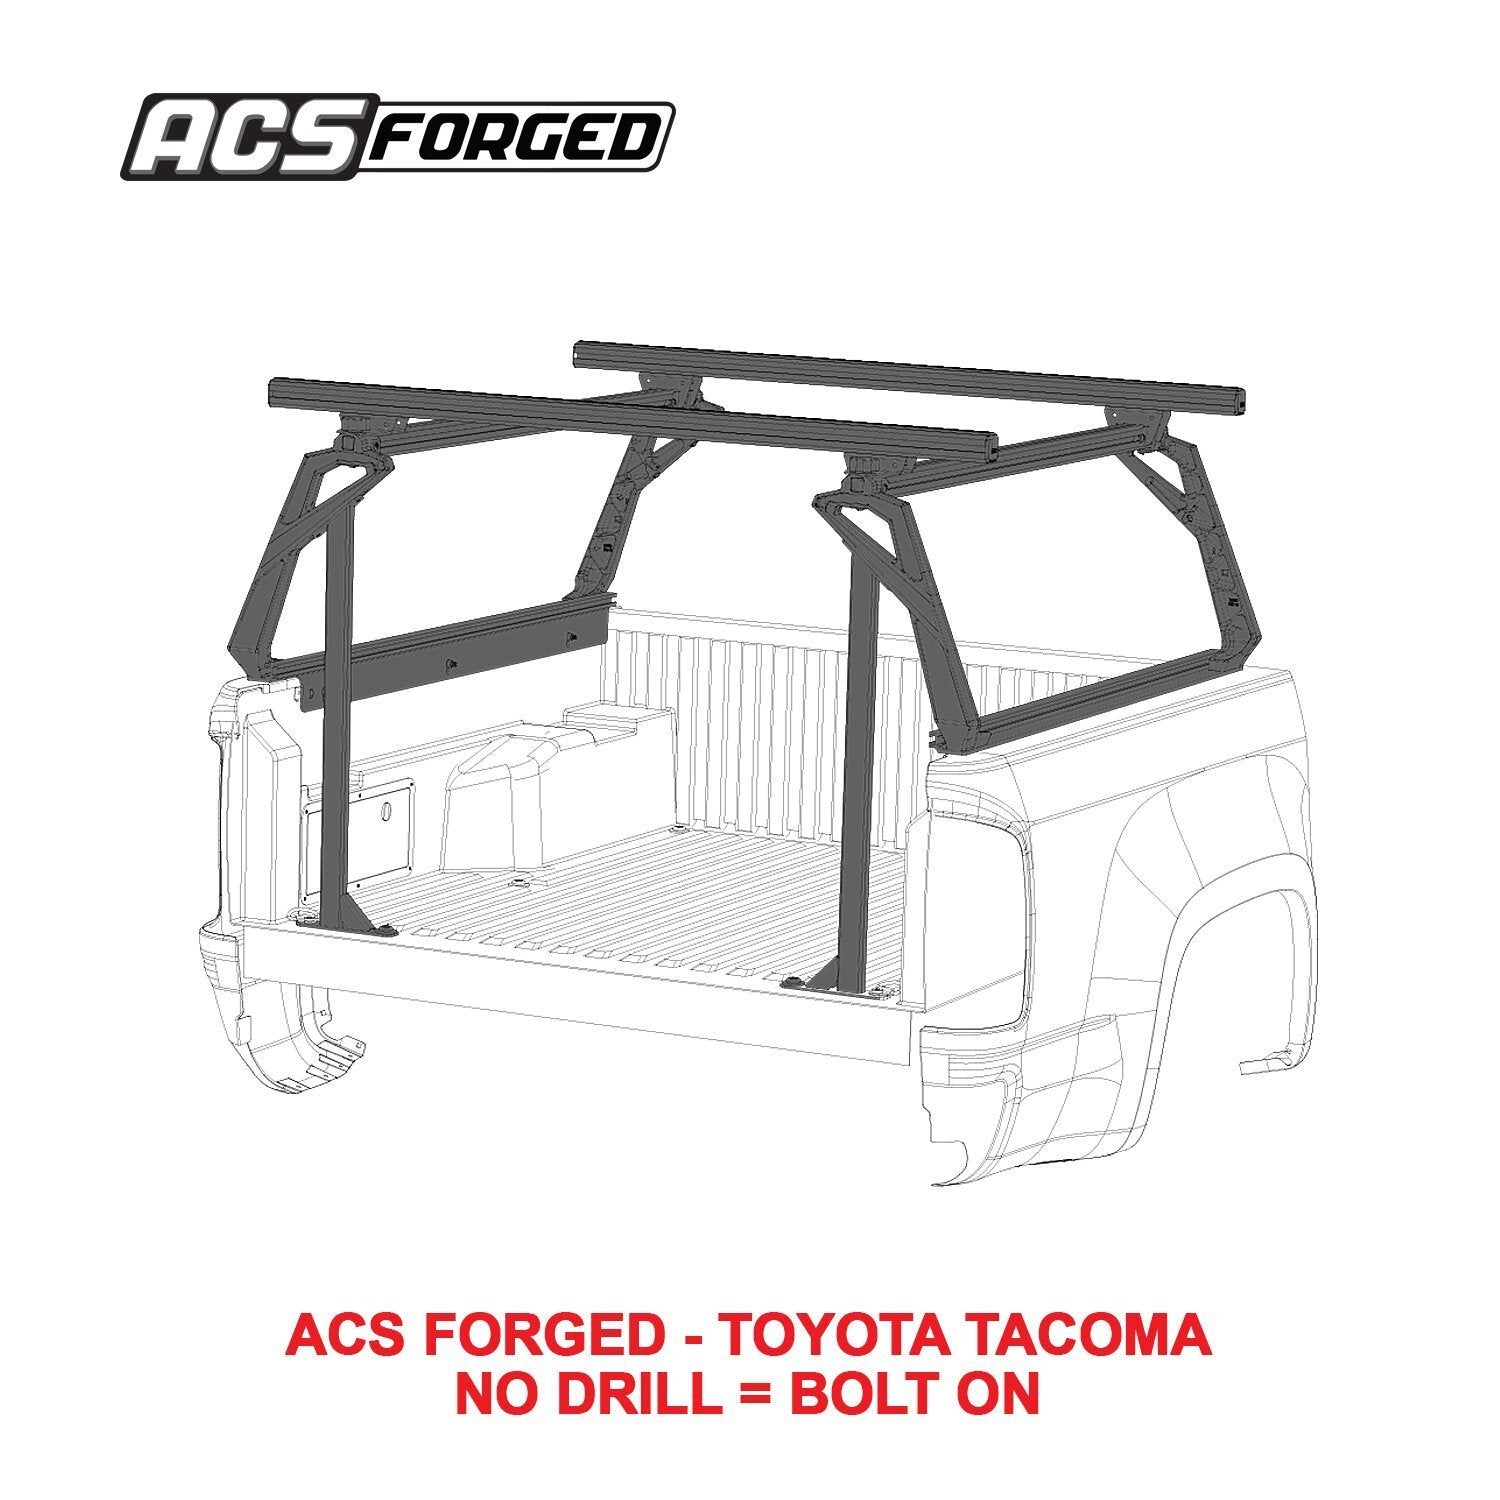 '05-15 Toyota Tacoma-ACS Forged Bed Accessories Leitner Designs design